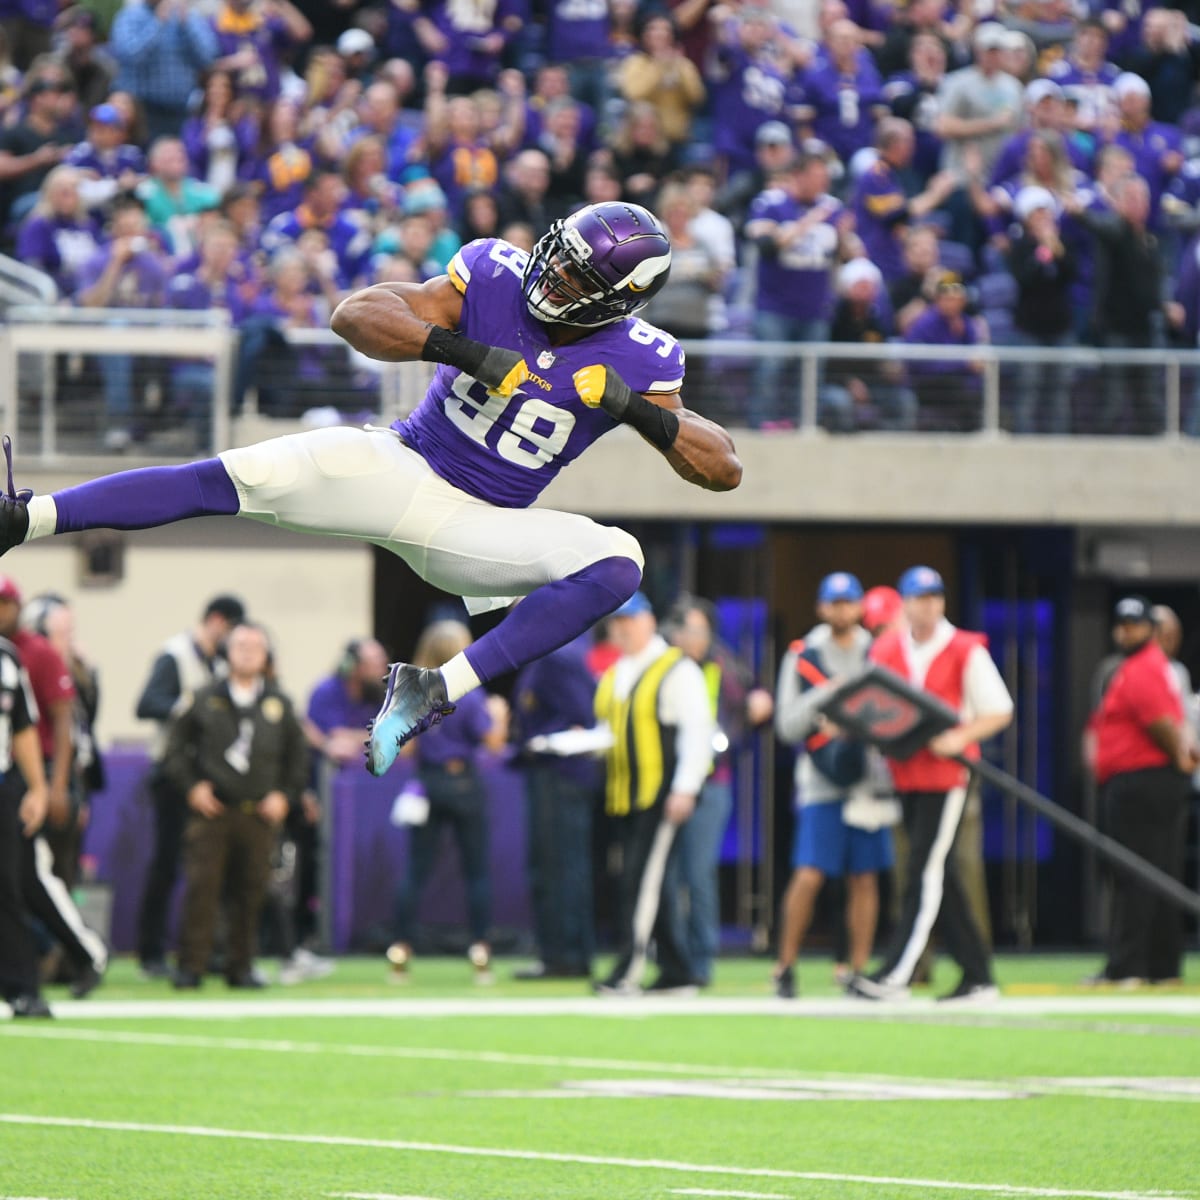 How the Minnesota Vikings Can Make the Playoffs: Through Week 17